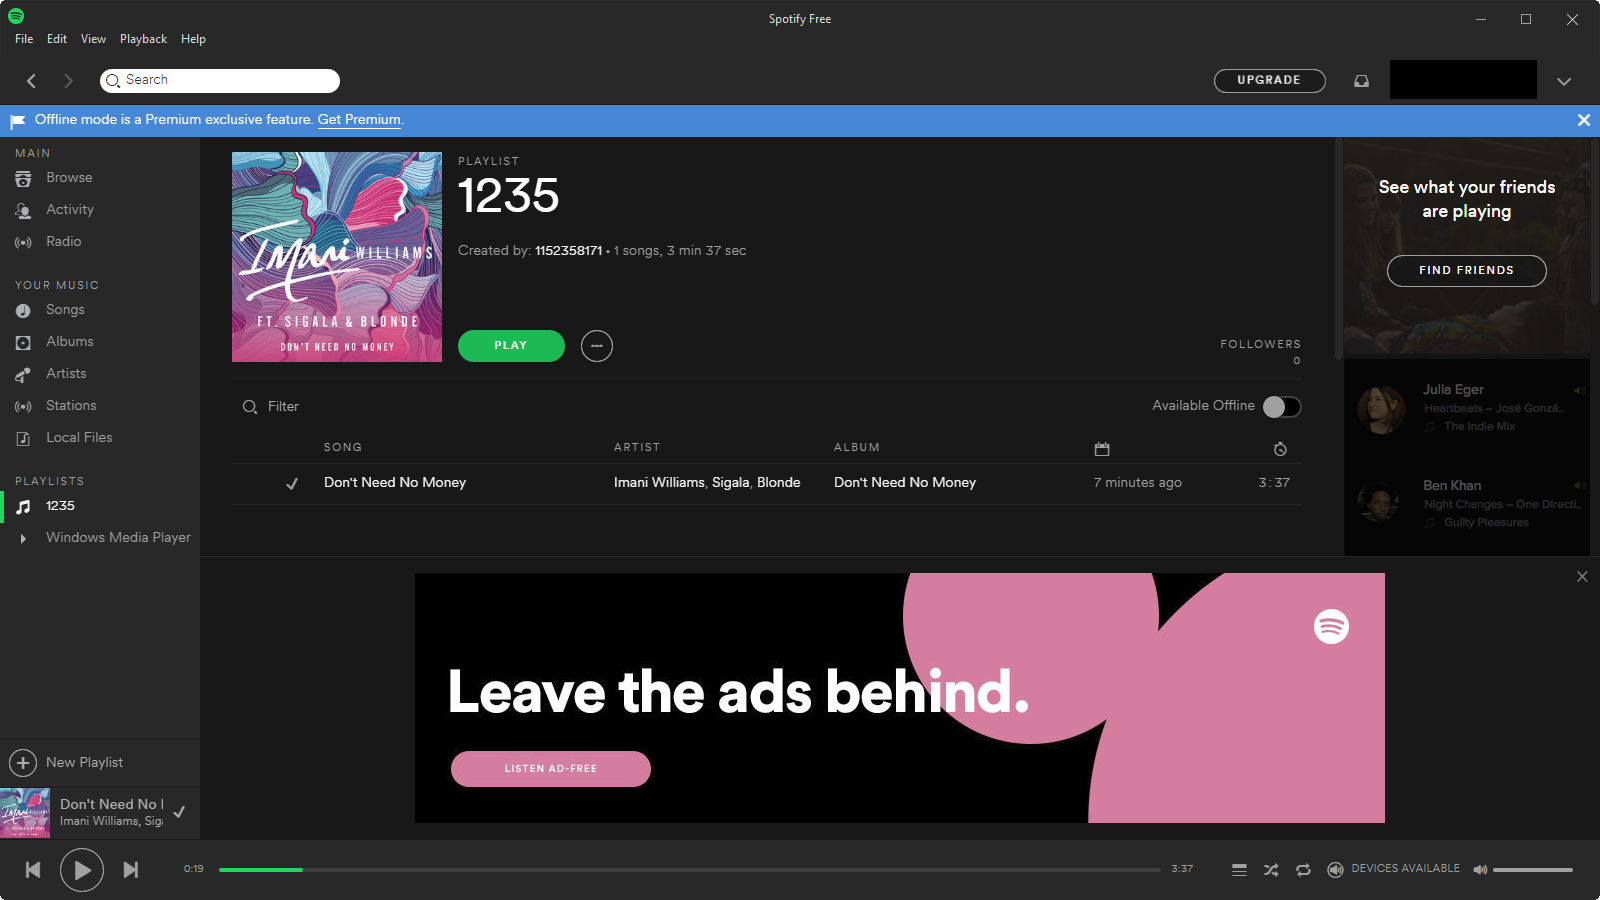 How to download spotify music to computer